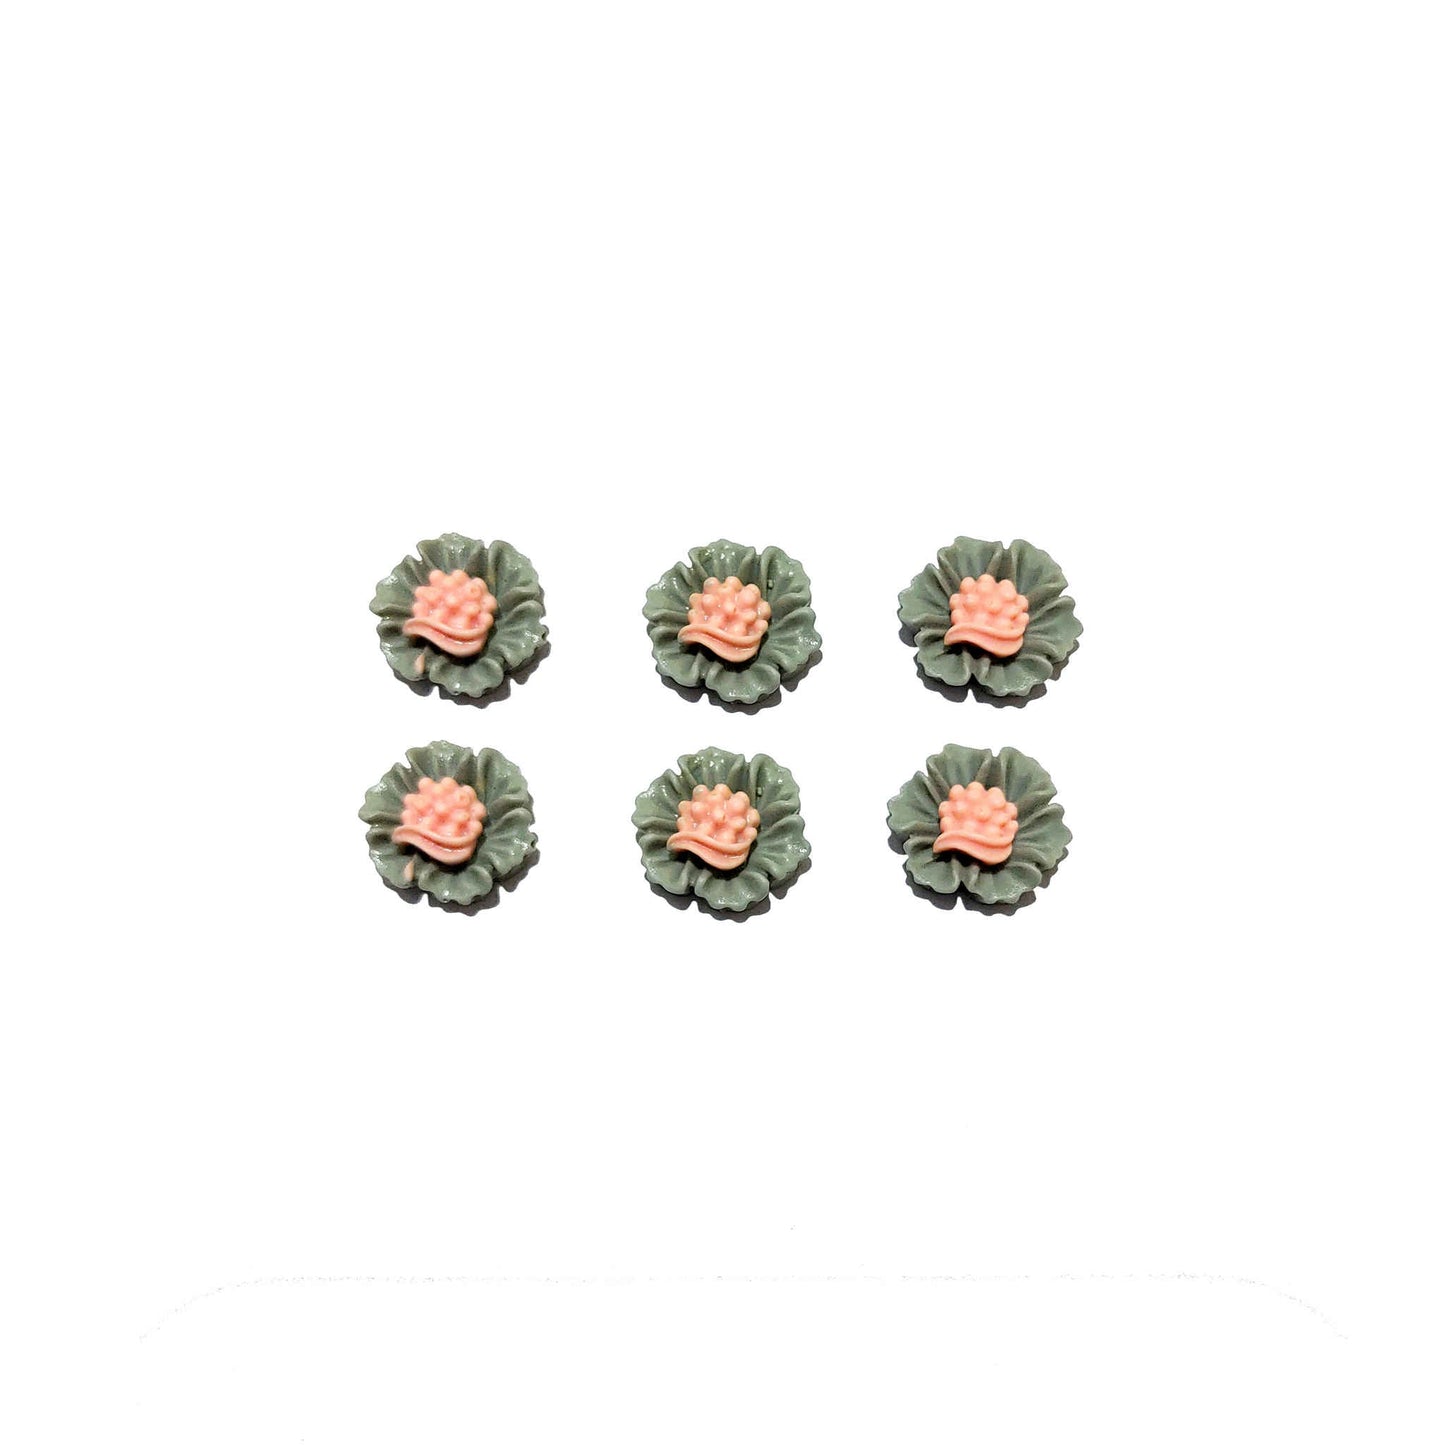 Indian Petals Flat Base Beautiful Floral 3D Cabochons for Craft Trousseau Packing or Decoration - Design 422, Style - Classic, Gray